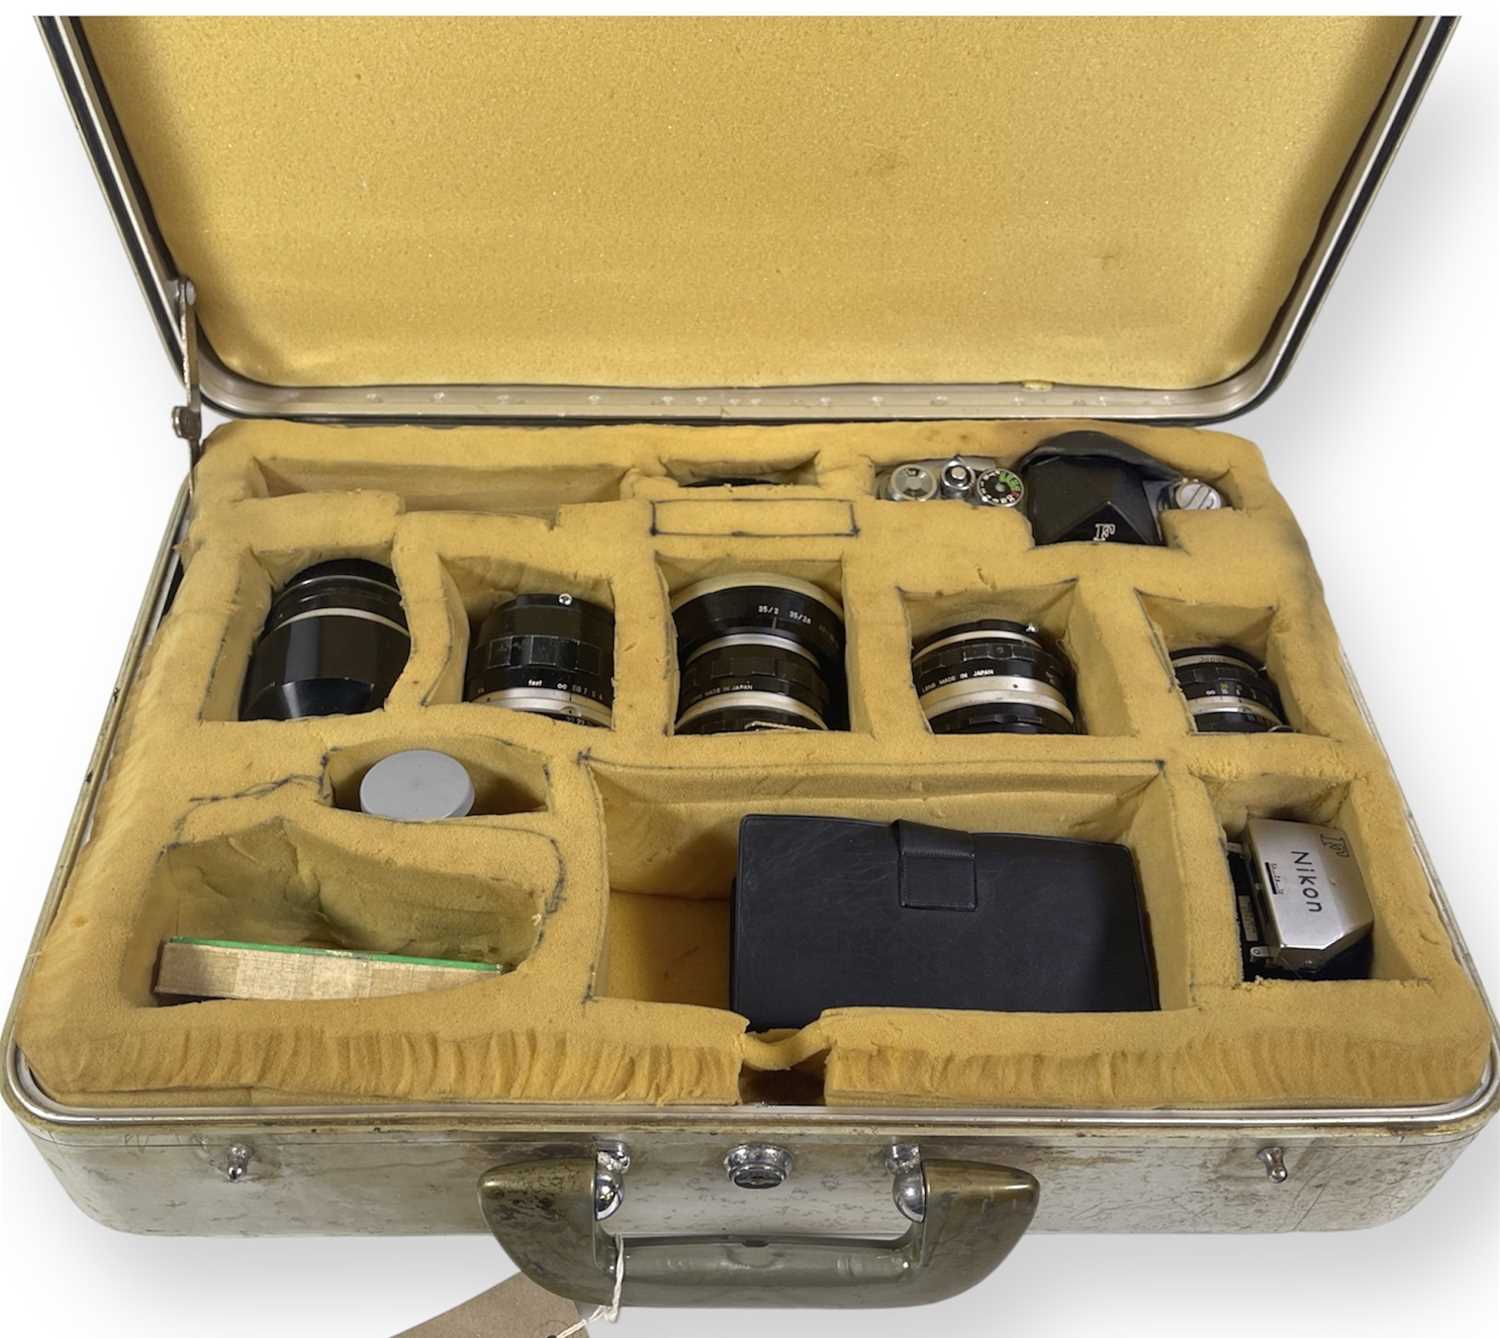 JIMI HENDRIX - THE NIKON CAMERA KIT USED TO SHOOT THE PSYCHEDELIC LP COVERS FOR 'ARE YOU EXPERIENCED - Image 10 of 18